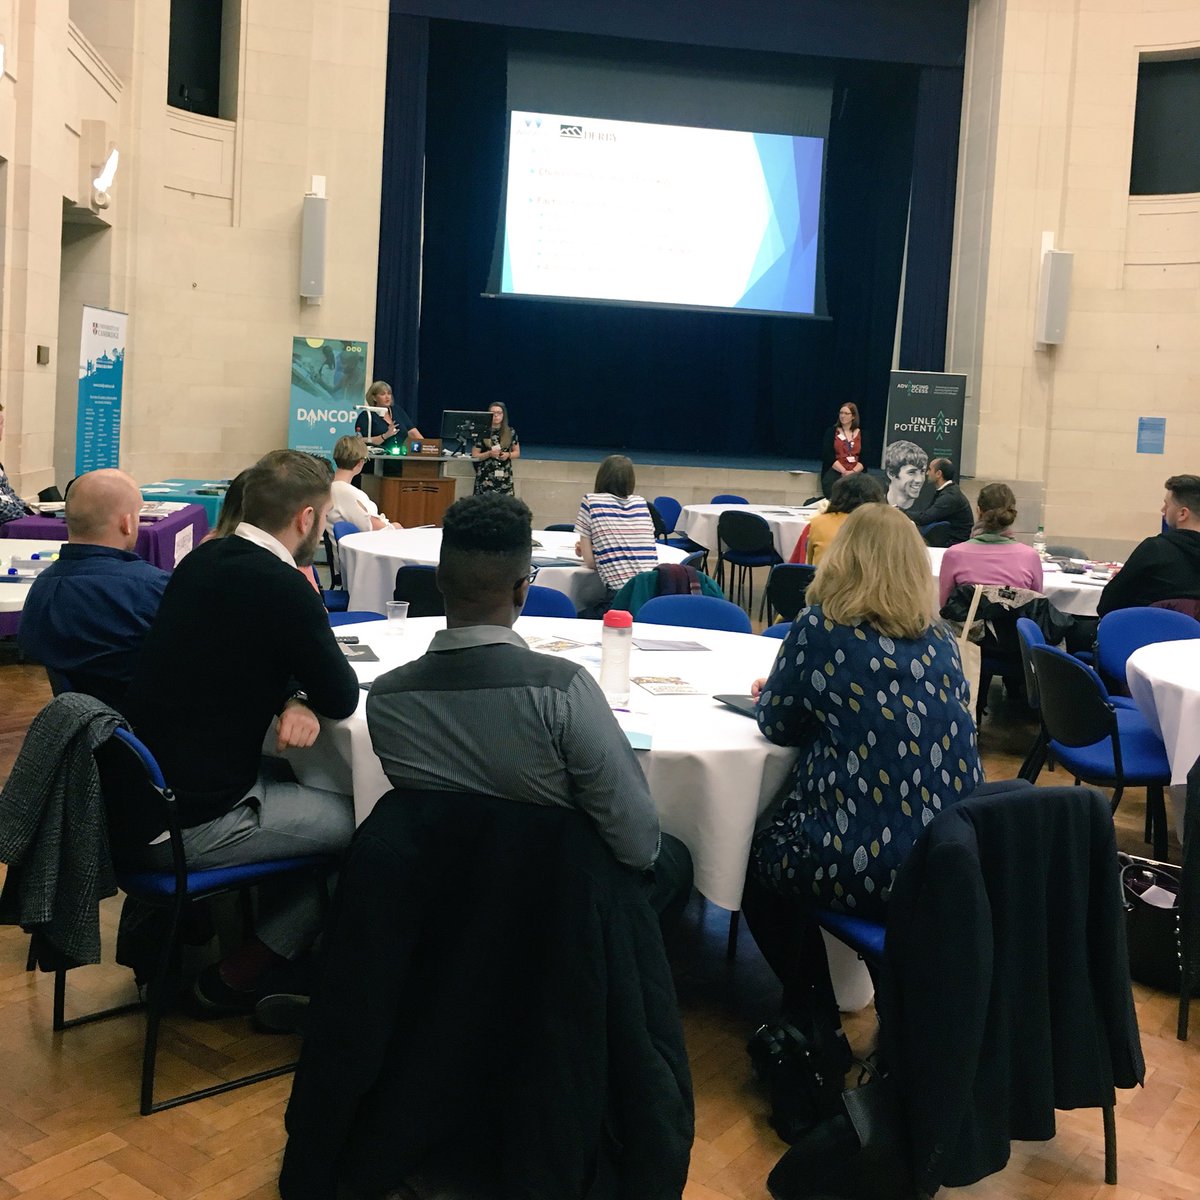 Jo and Charlotte from @DerbyUni and Maria from @warwickuni are taking us through how to support learners to choose their post-16 study options at our @AdvancingAccess conference  - don’t forget to consider how it might impact their post-18 decisions! #WeAreNCOP #OutreachWorks